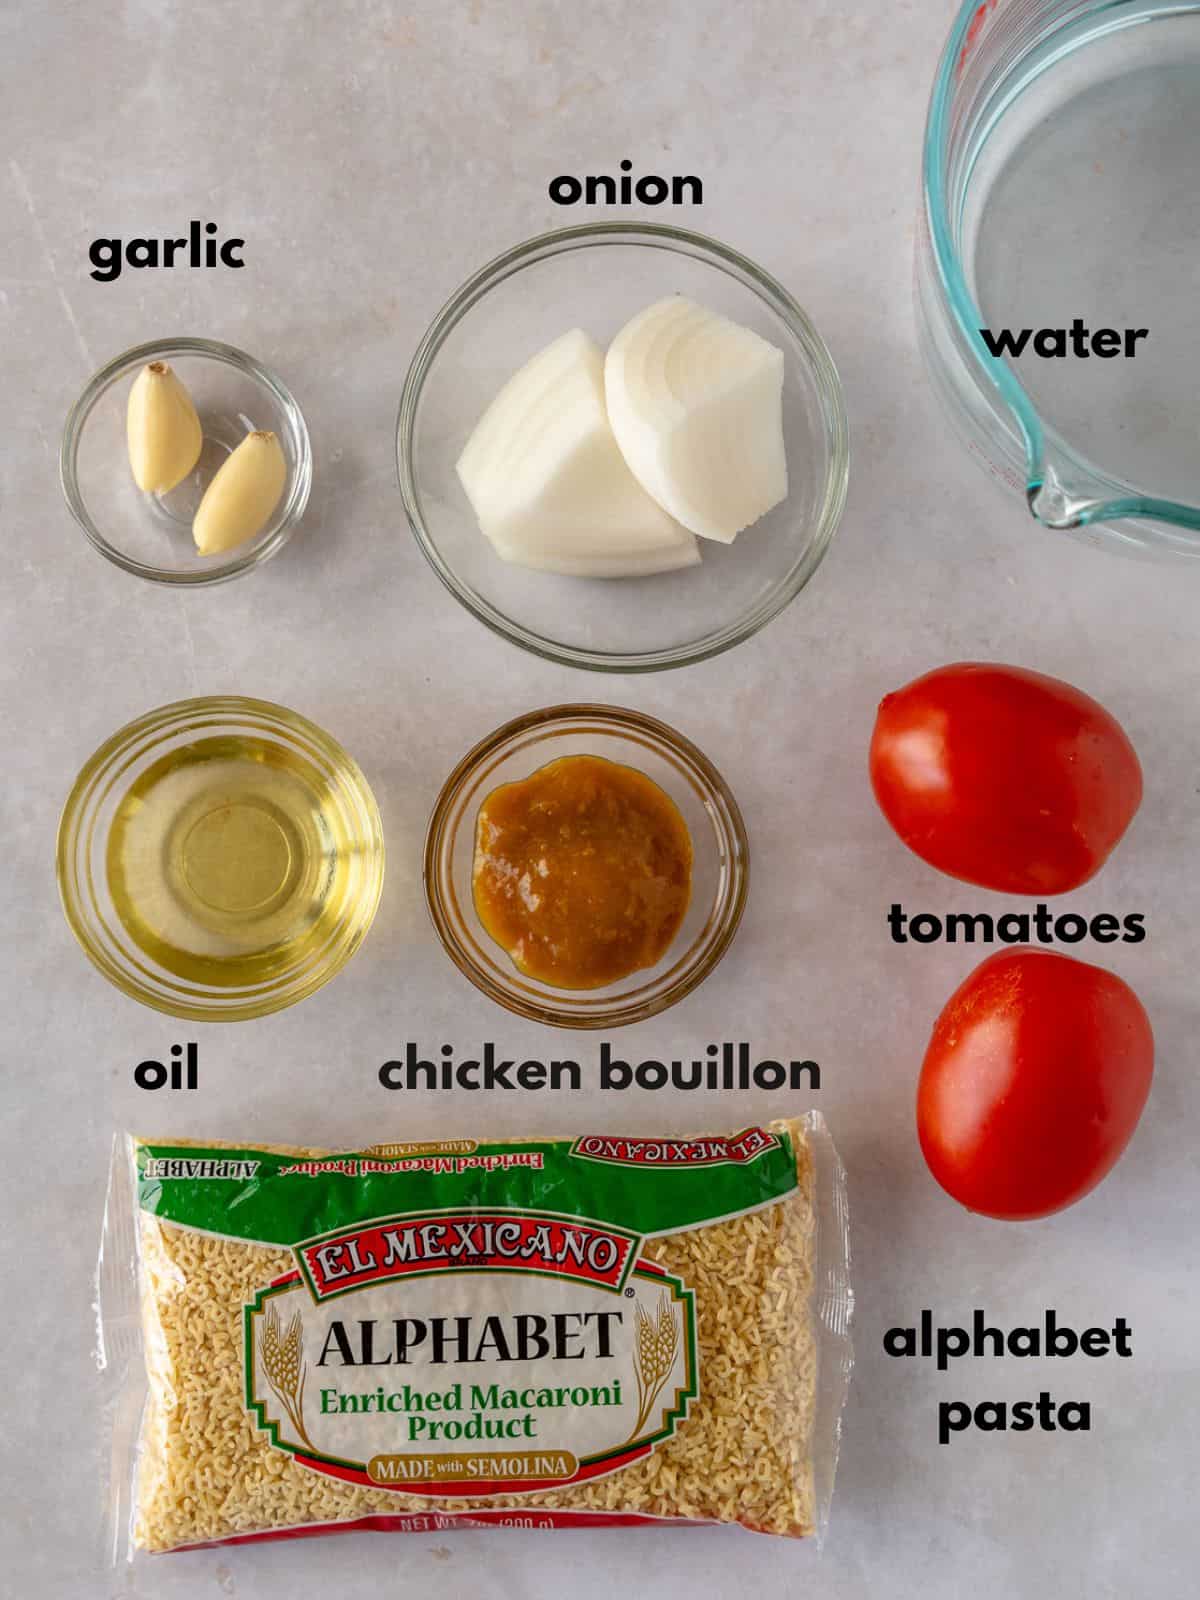 Ingredients with text, garlic, onion, water, oil, chicken bouillon, tomatoes, and alphabet pasta.